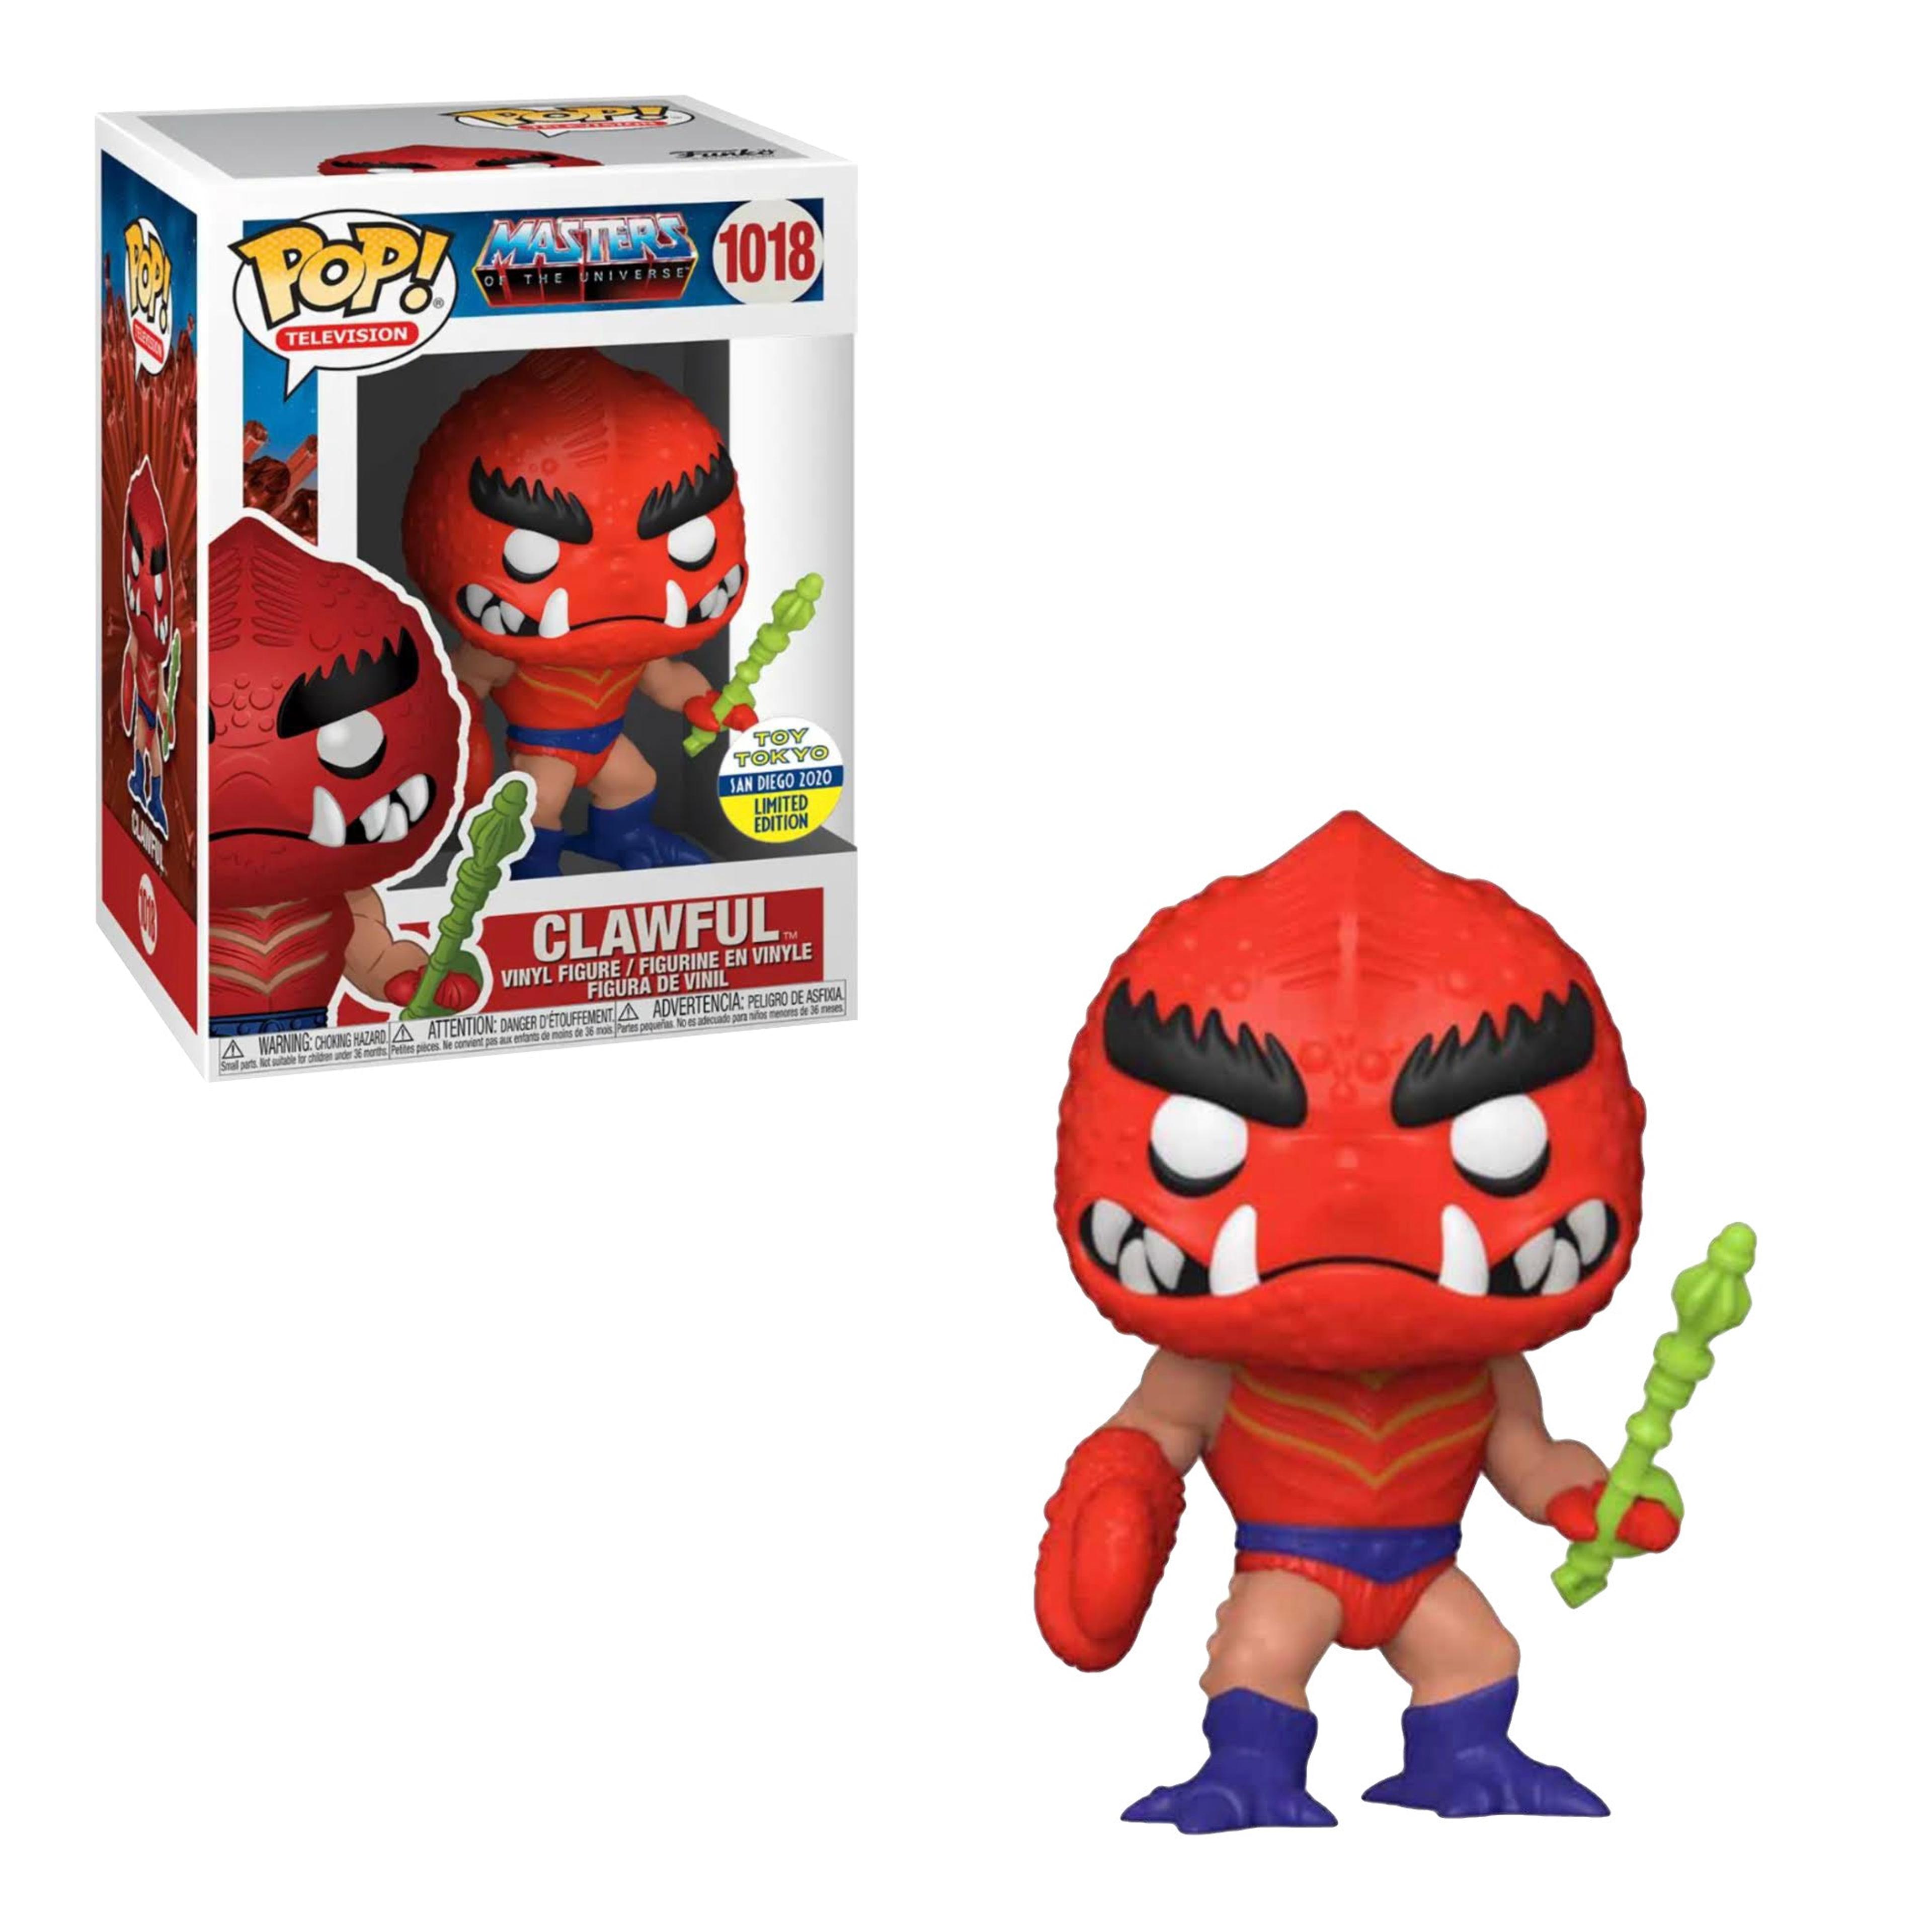 Funko Pop! Television: Masters of the Universe - Clawful #1018 S